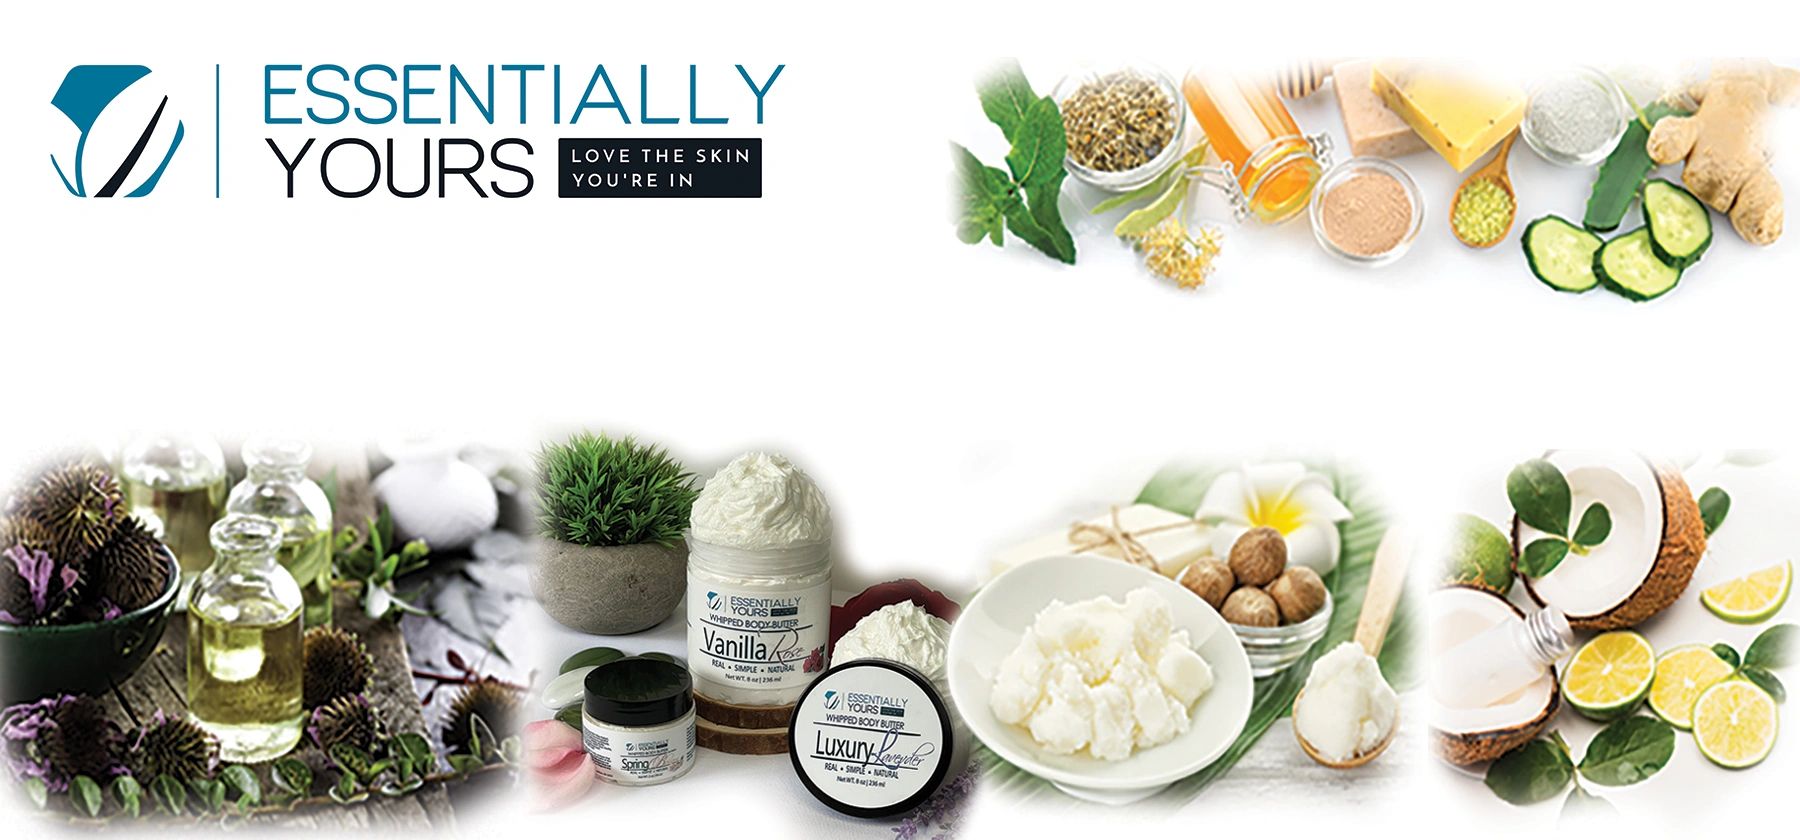 Essentially Yours - Natural, Skin Care, Body Butter